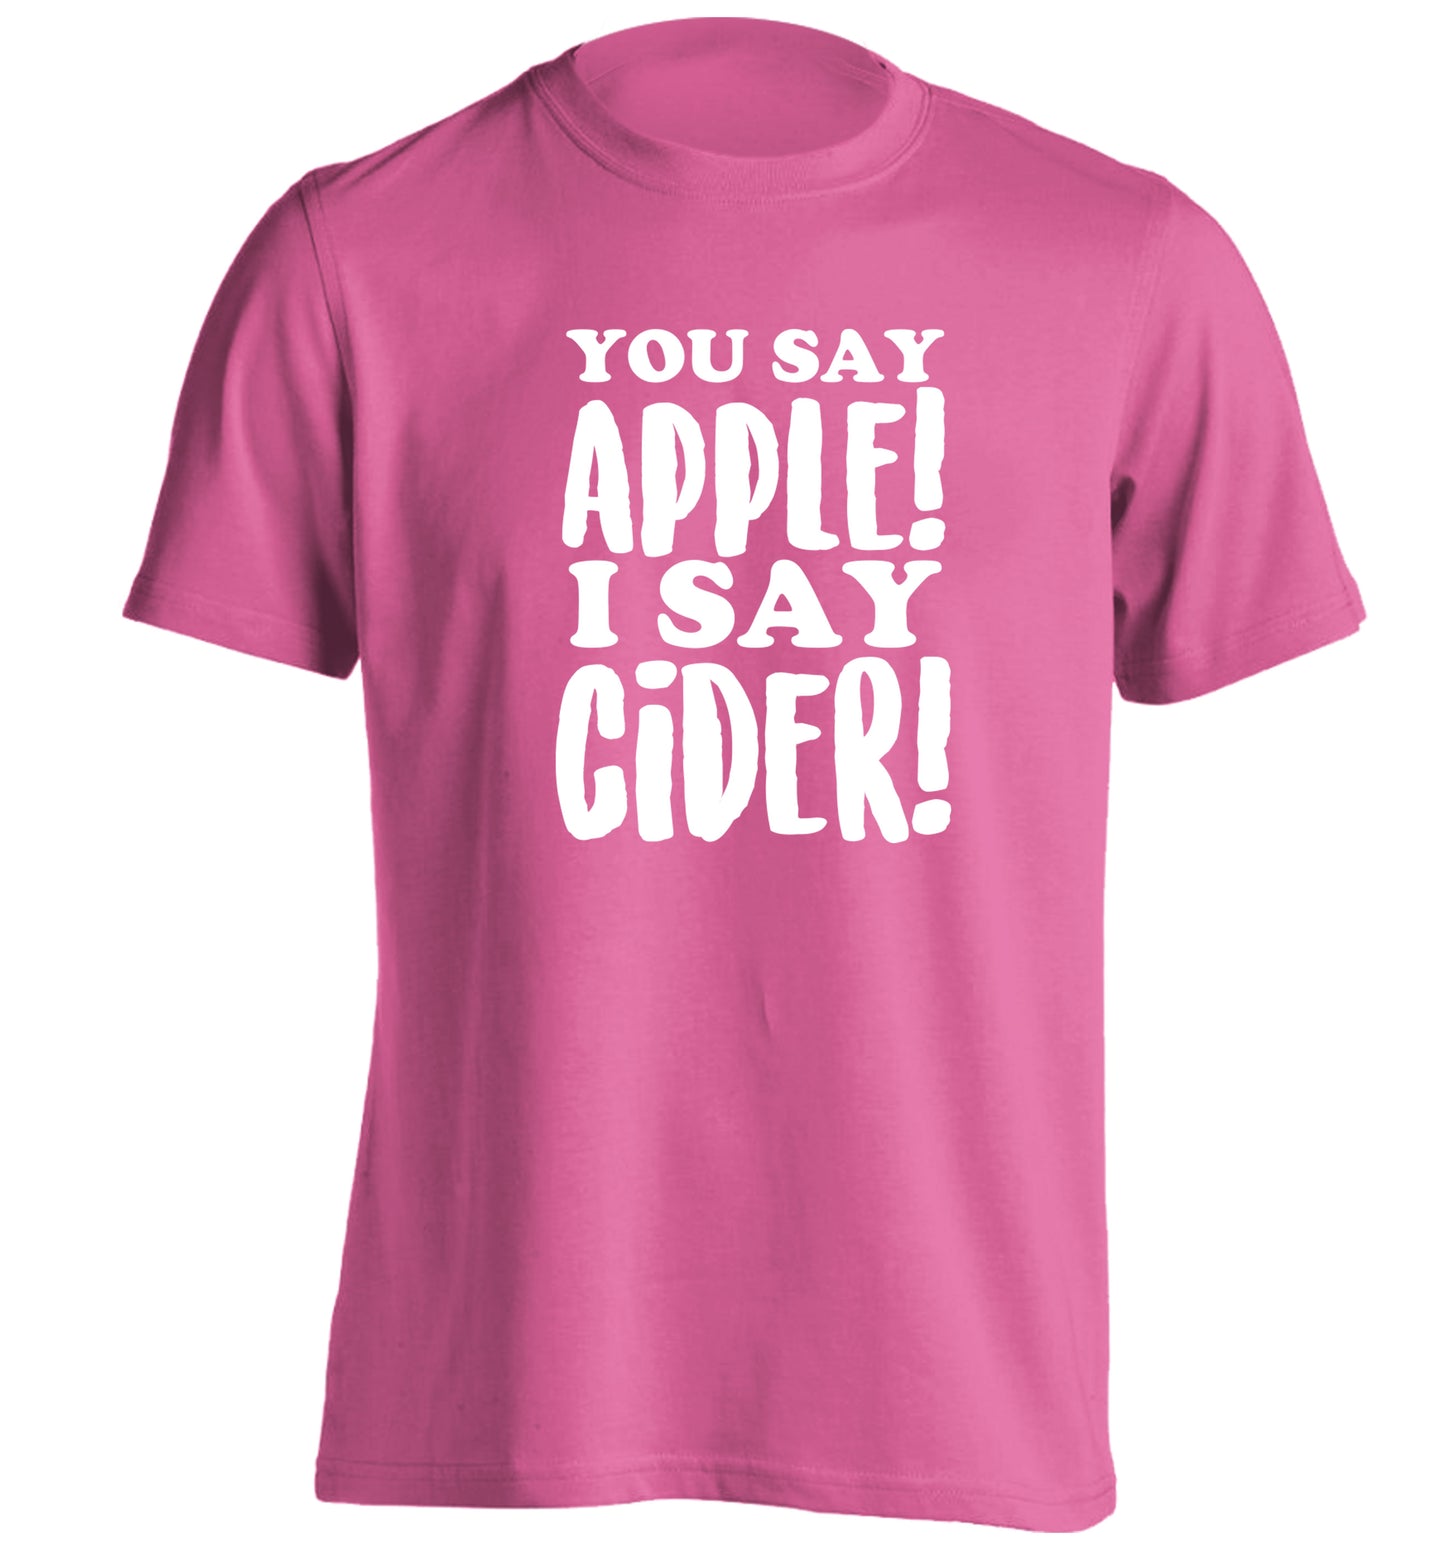 You say apple I say cider! adults unisex pink Tshirt 2XL